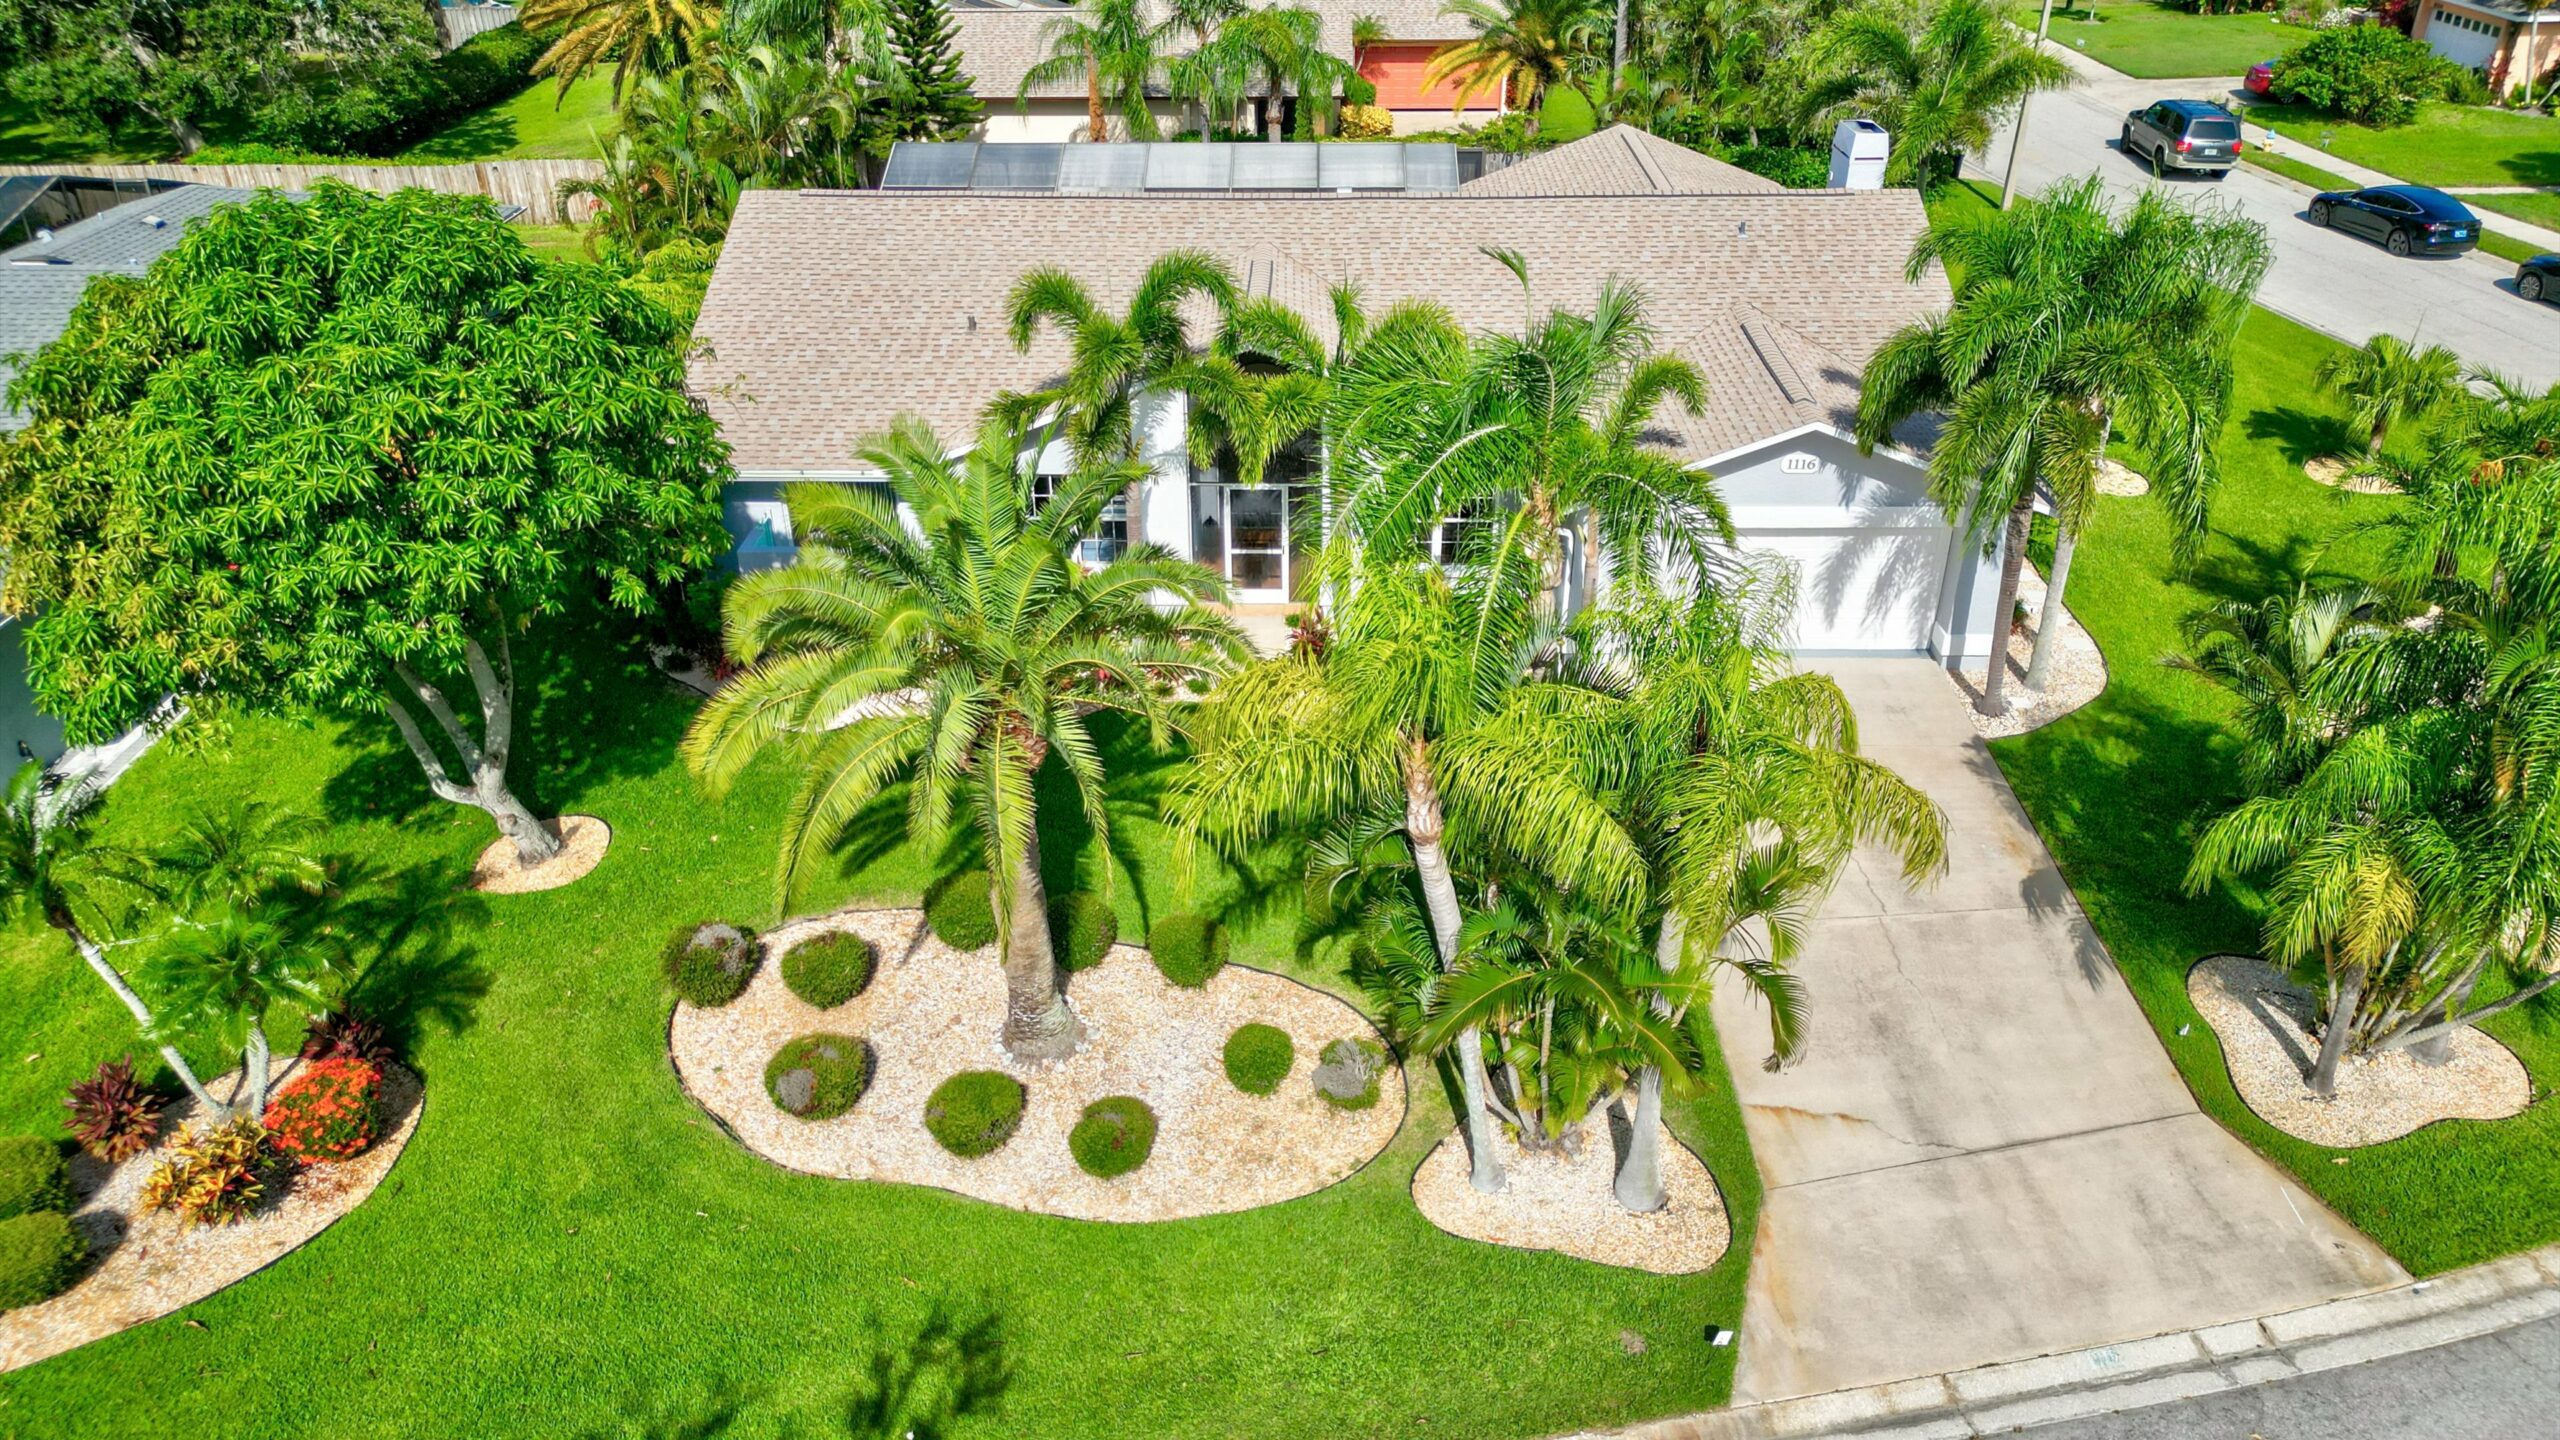 An aerial shots of our newest listing, Mare é Fiori, showcasing all the greenery that surround it